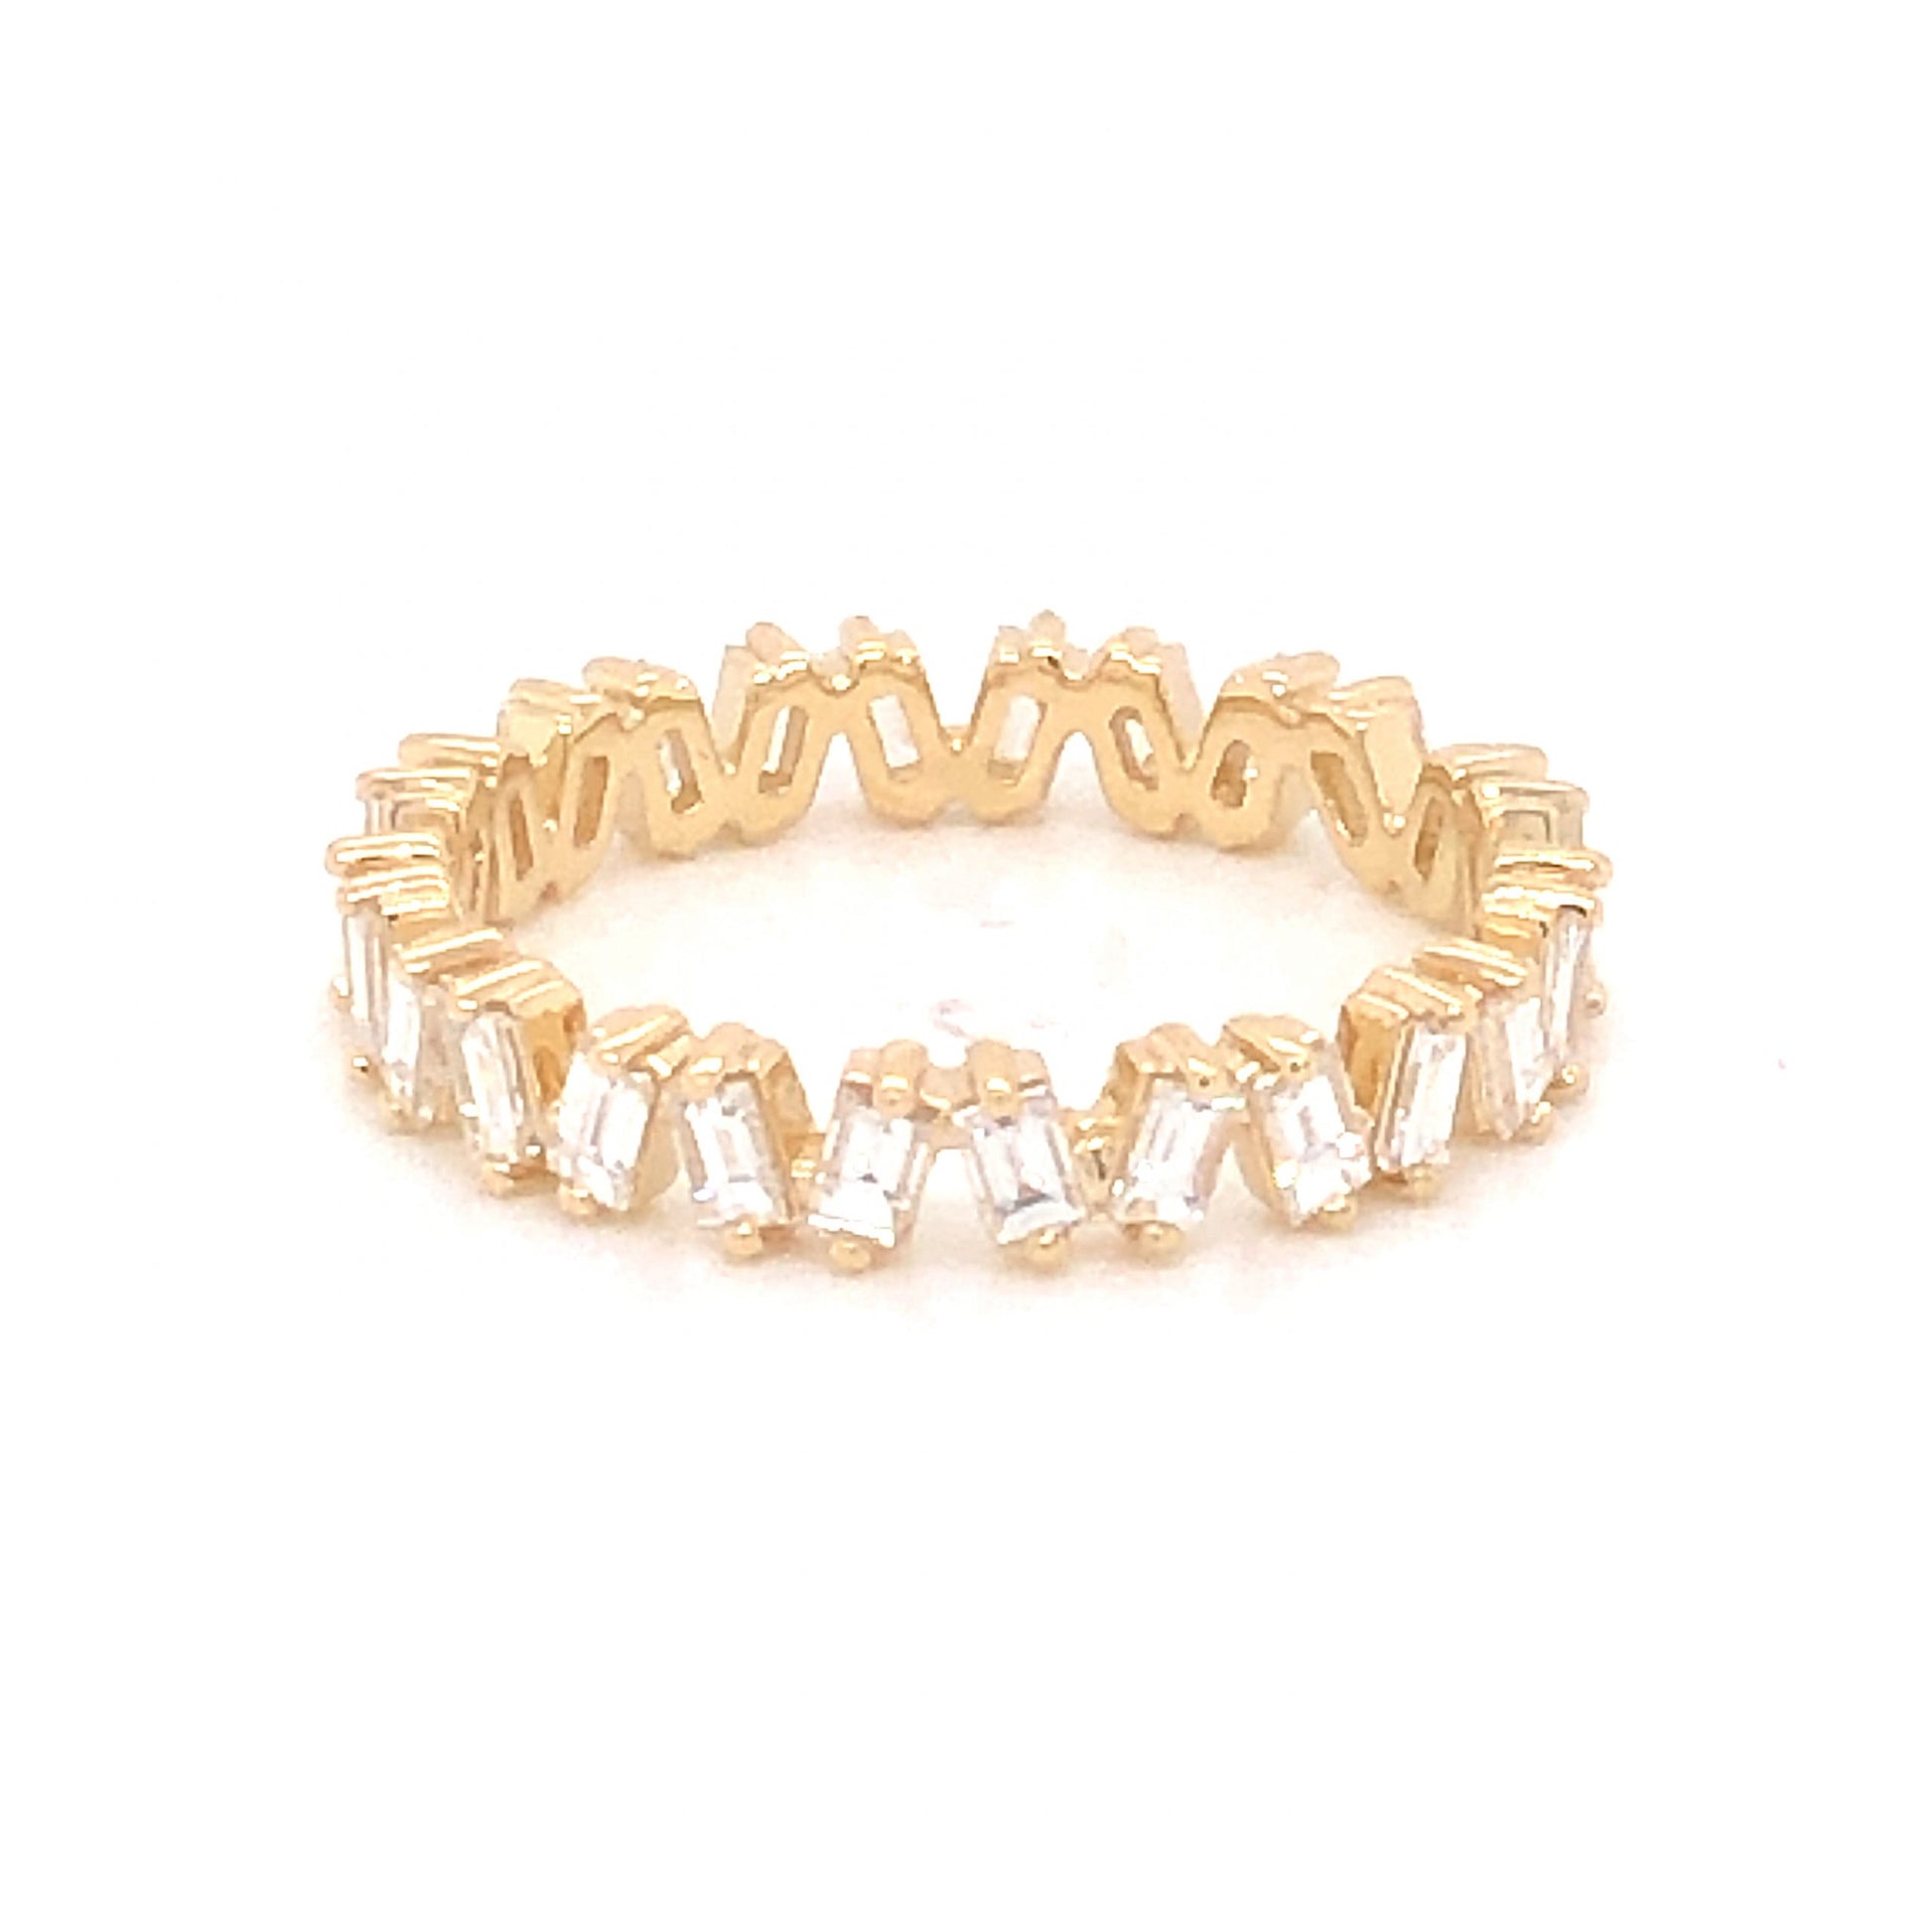 ***HOLD*** 1.30 Baguette Cut Diamond Eternity Wedding Band in 14k Yellow Gold